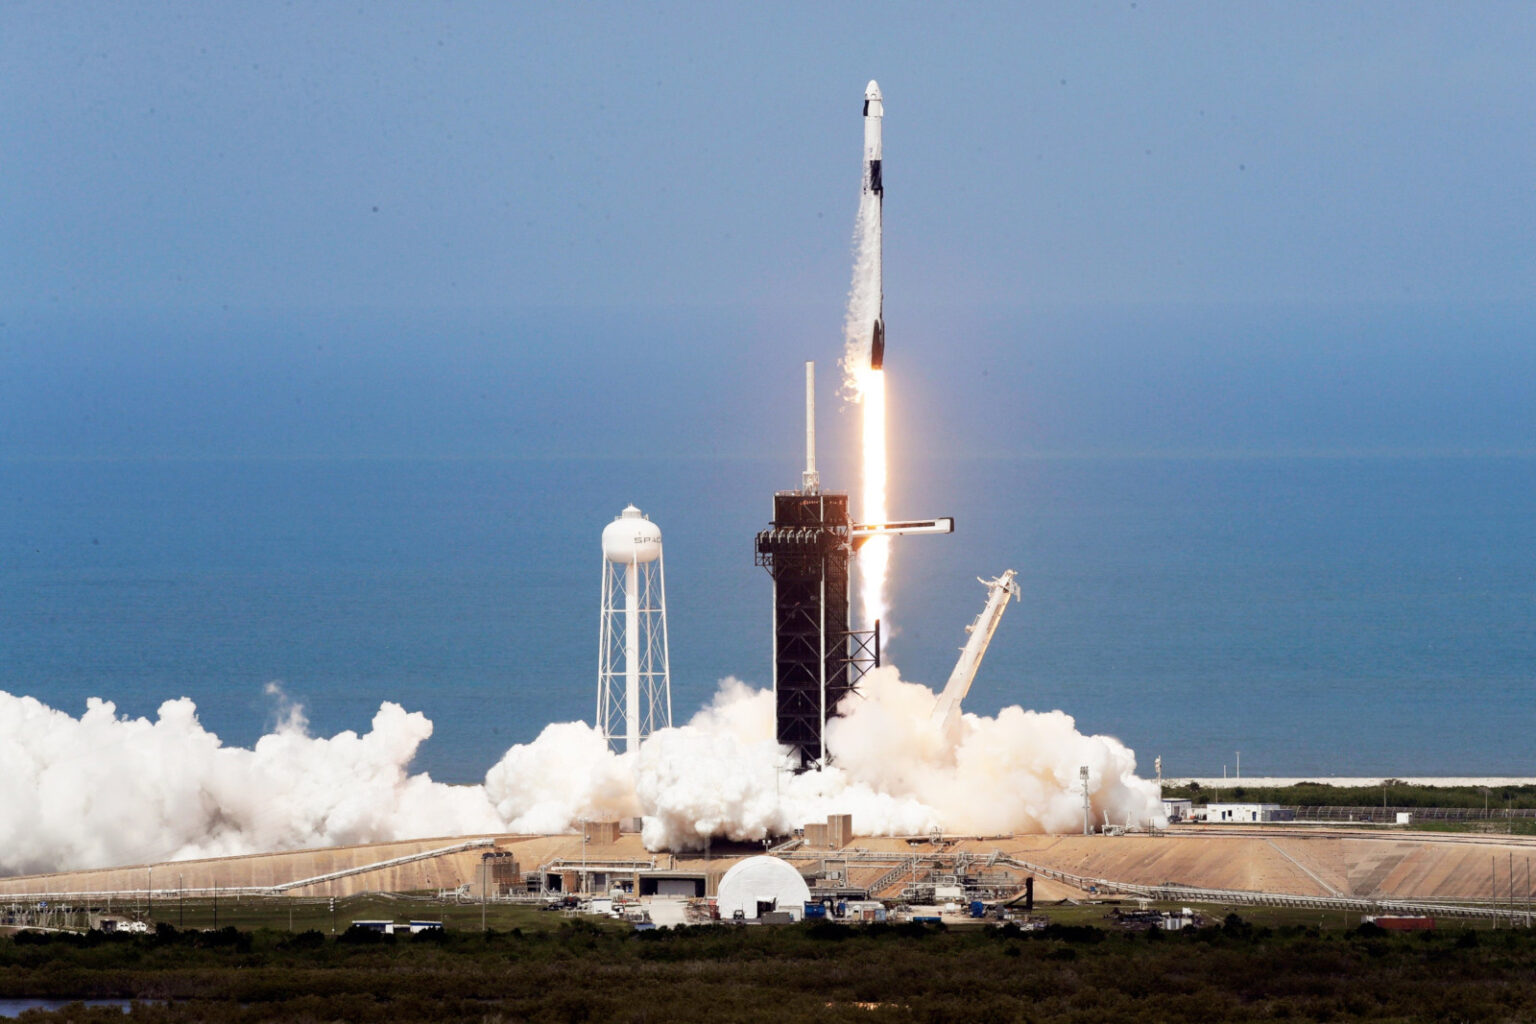 Ever wanted to watch a rocket launch? Tomorrow, you can! SpaceX is launching its Falcon 9 off Cape Canaveral, so tune in and learn about the mission here!